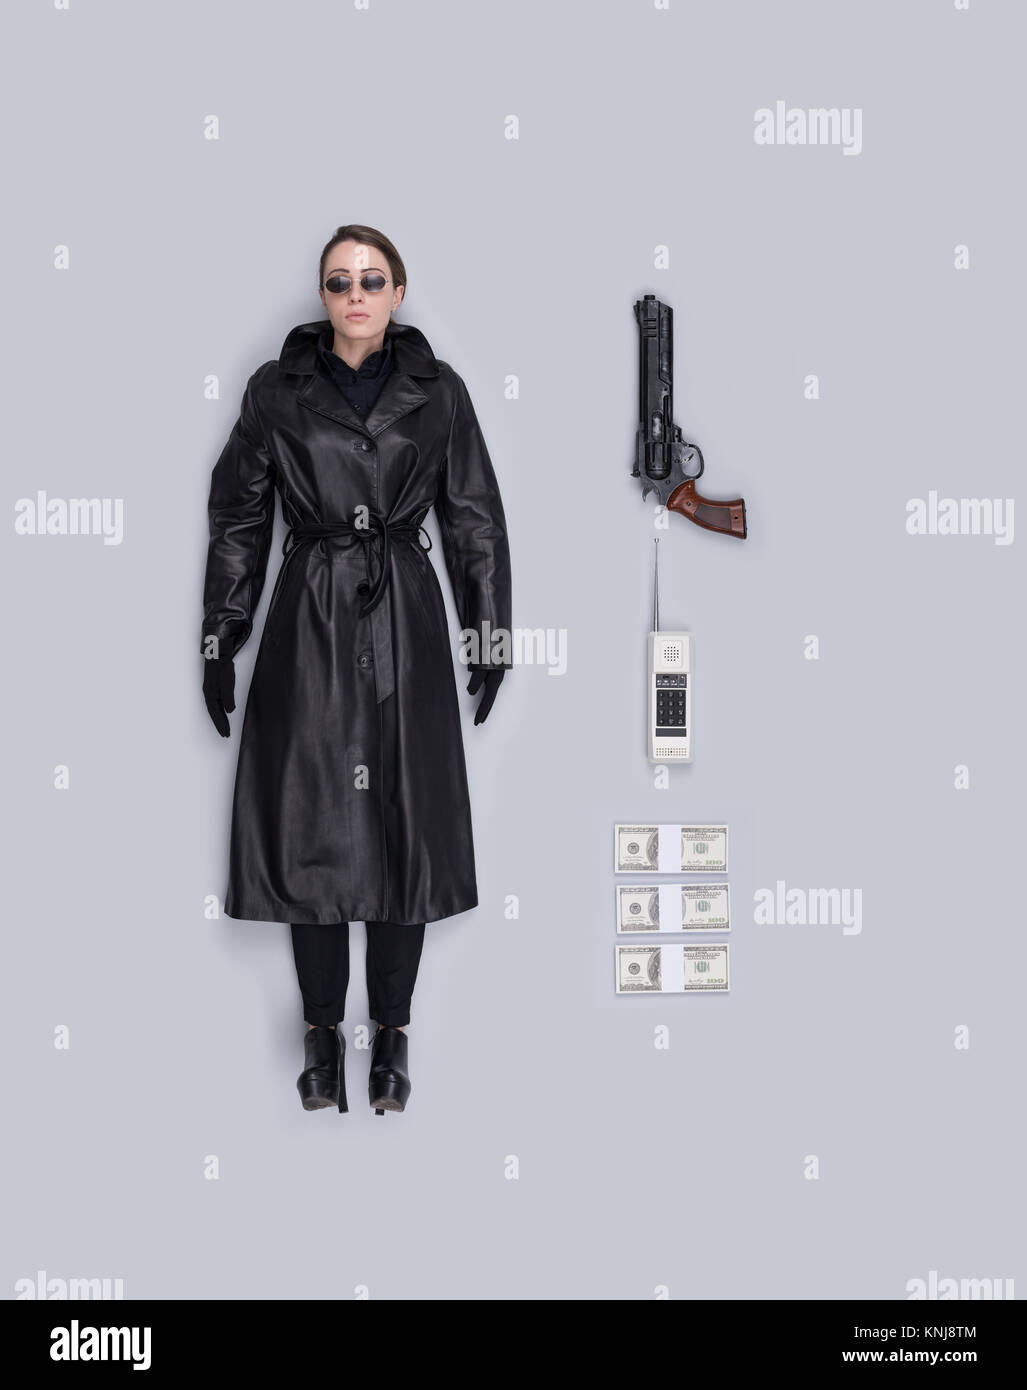 Lifelike female spy agent human doll with leather coat, gun and accessories, flat lay Stock Photo